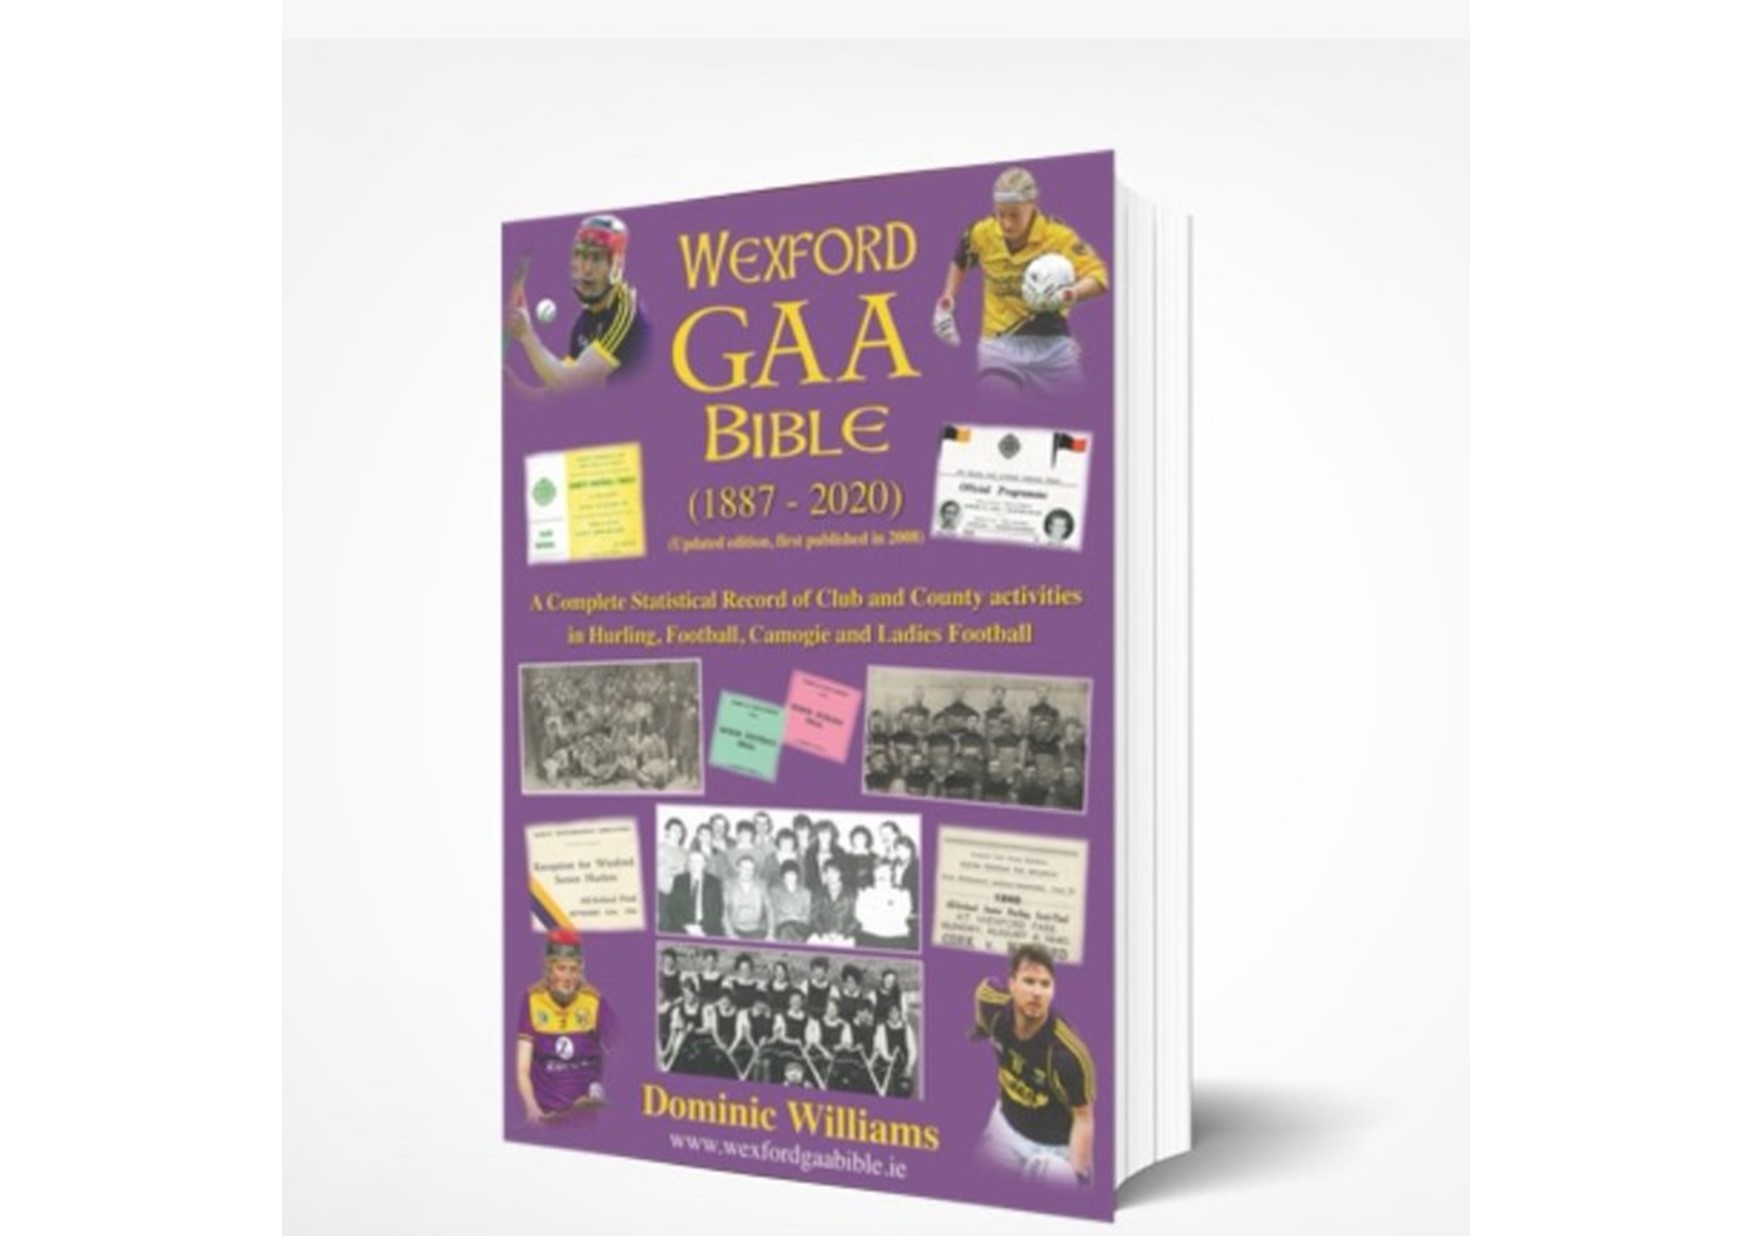 The updated ‘Wexford GAA Bible’ By Dominic Williams is available to purchase online NOW!